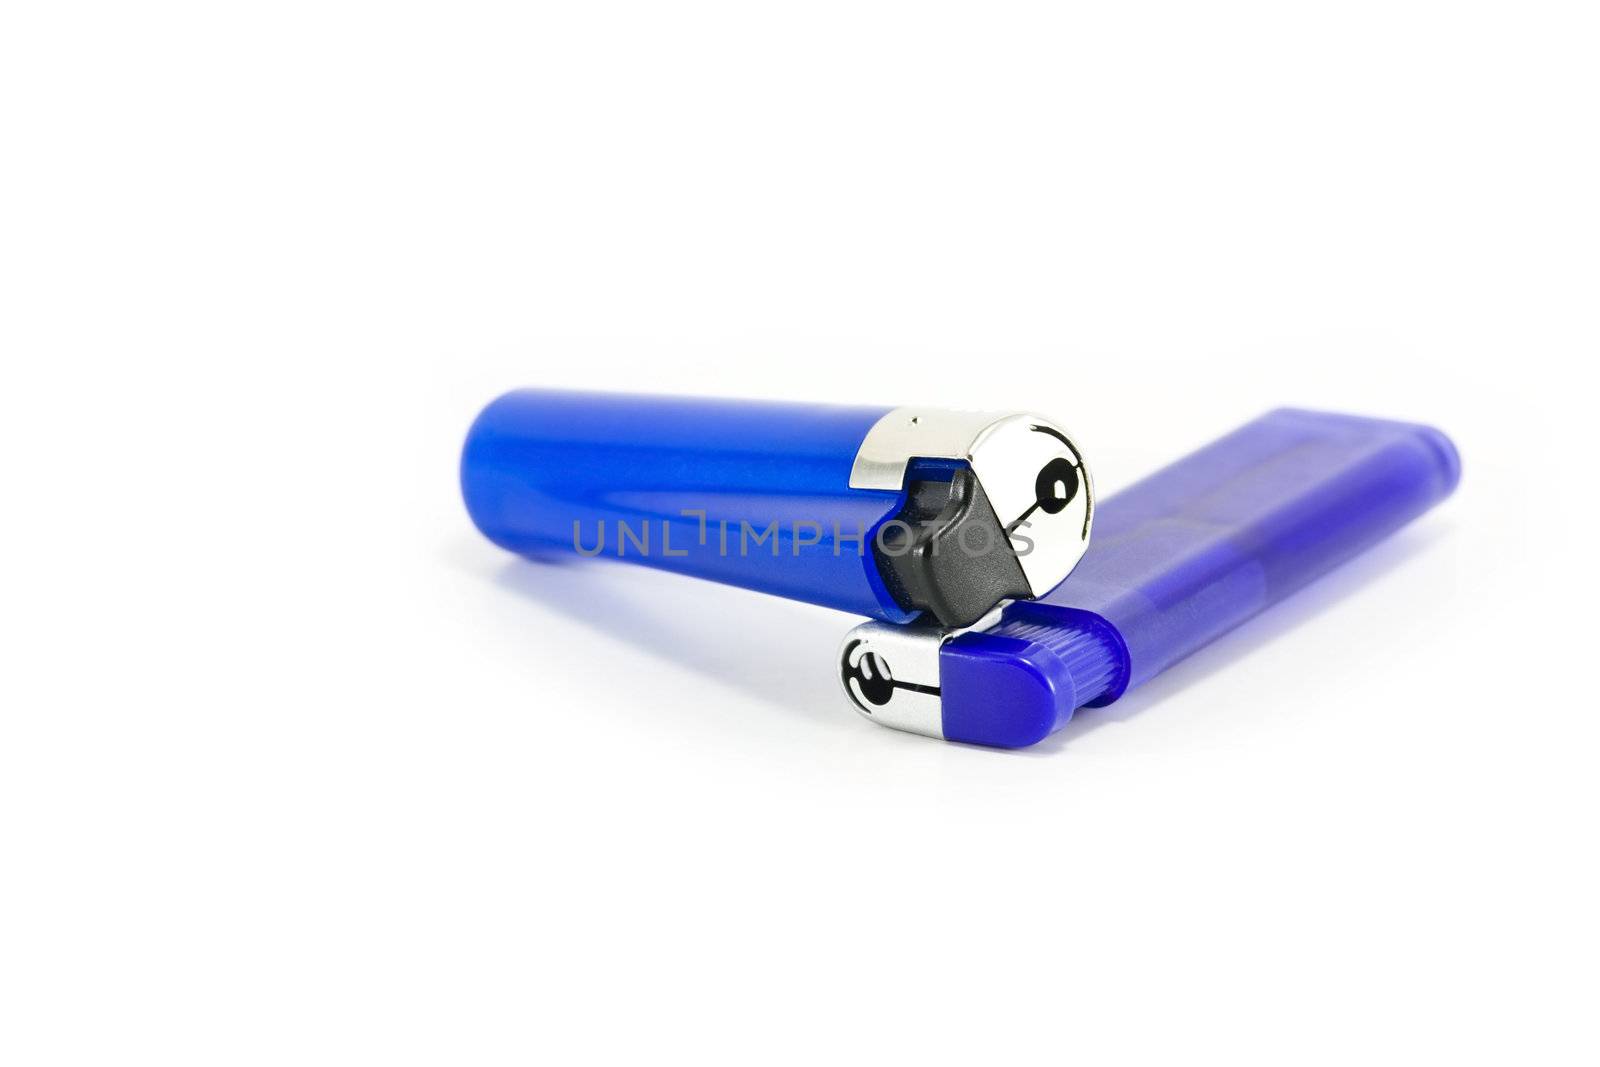 Two blue plastic lighters on white by ChrisAlleaume